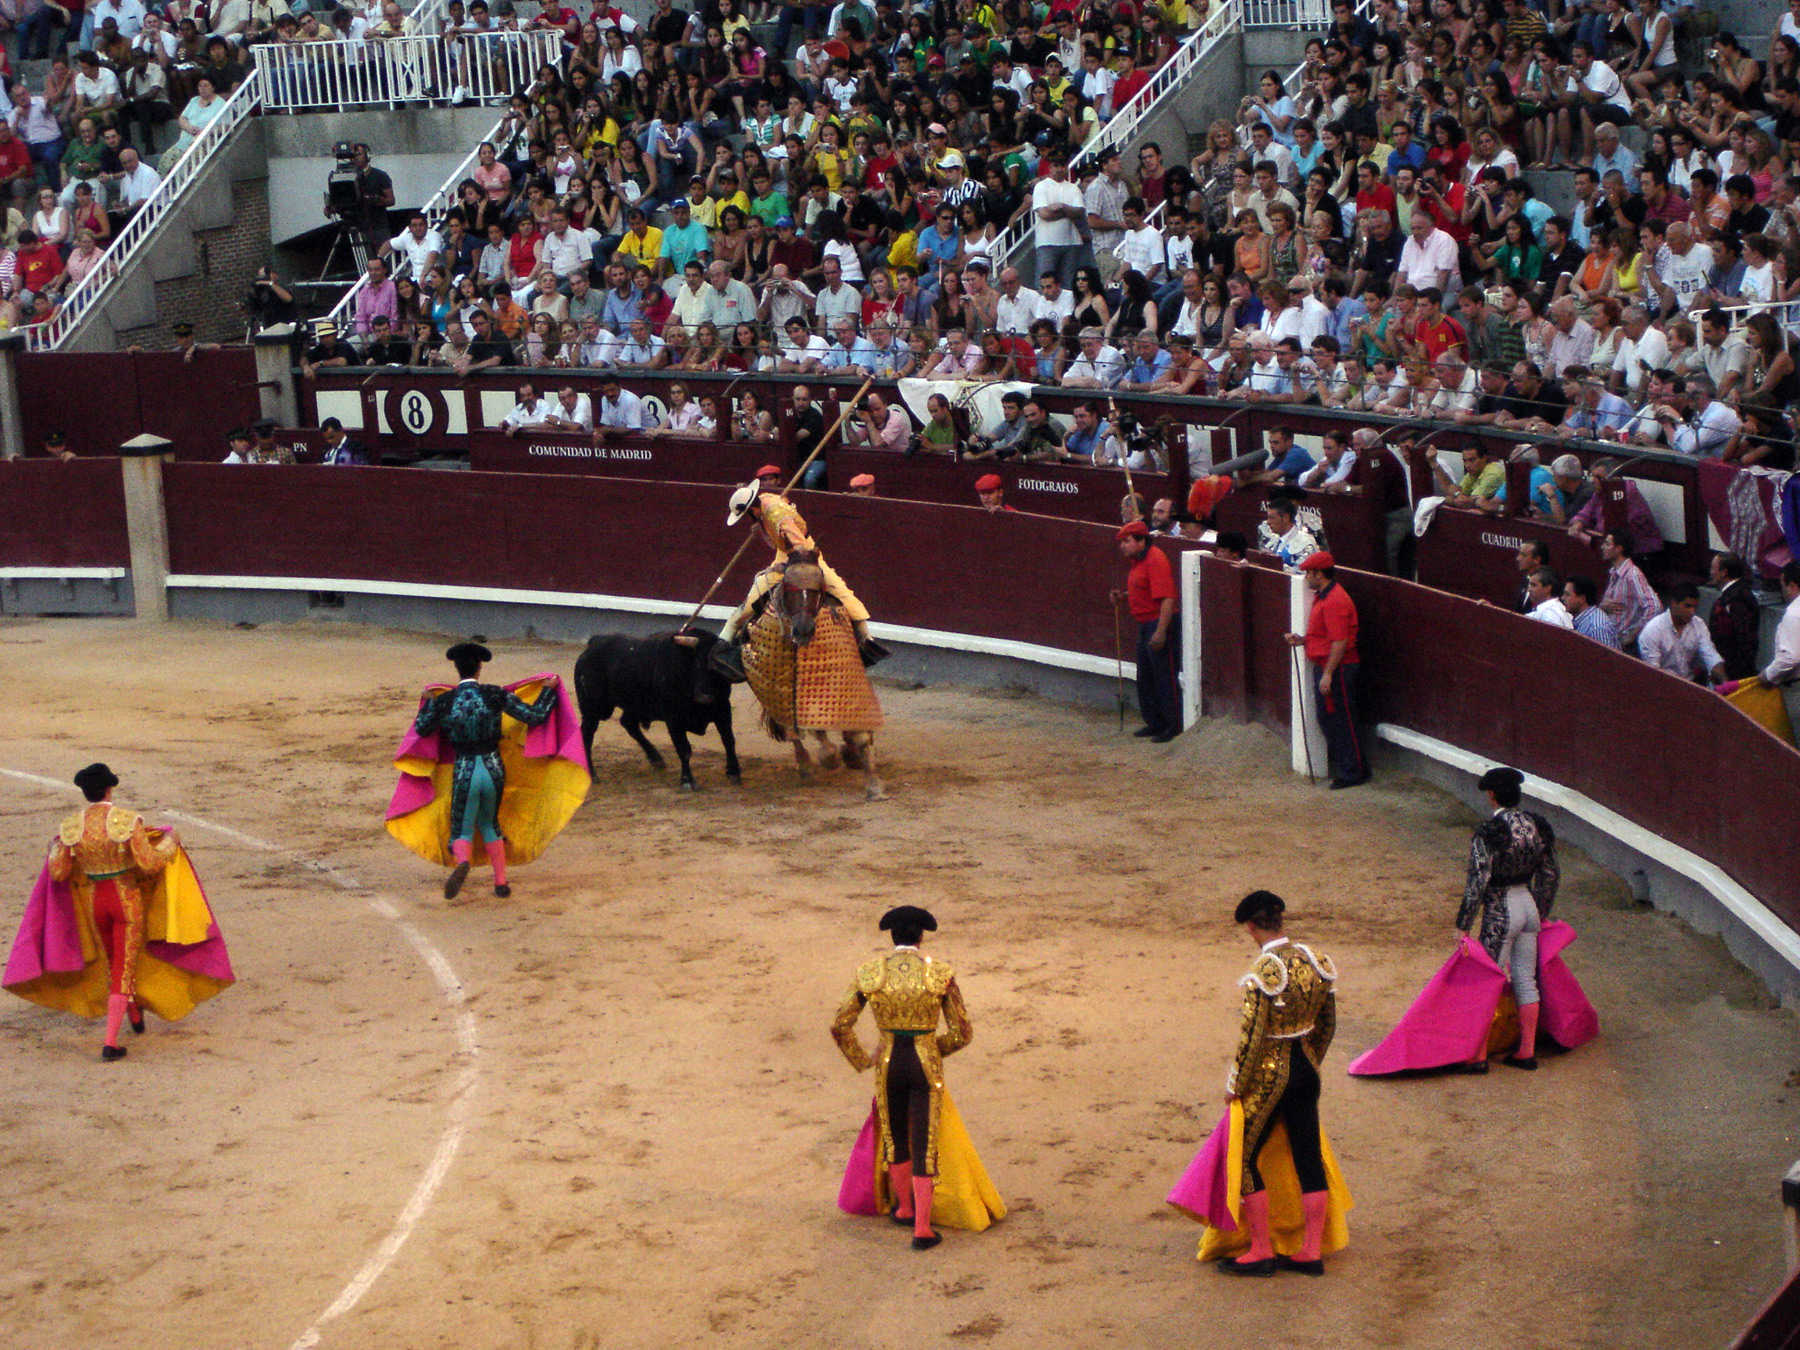 A Trip to the Bullfight Two Bulls Are Plenty by Rick Steves